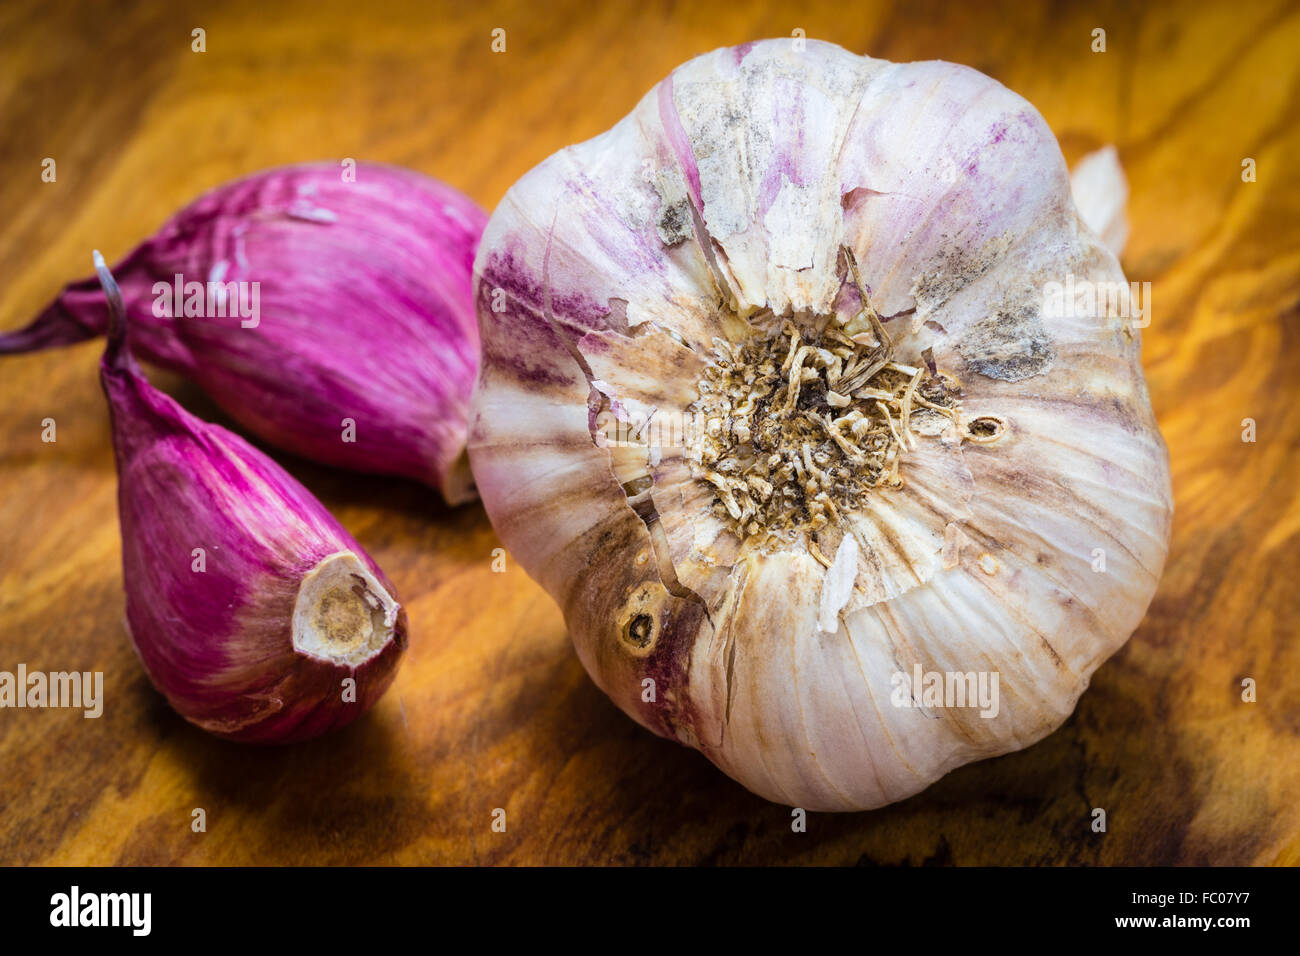 Organic garlic on wooden table background Stock Photo